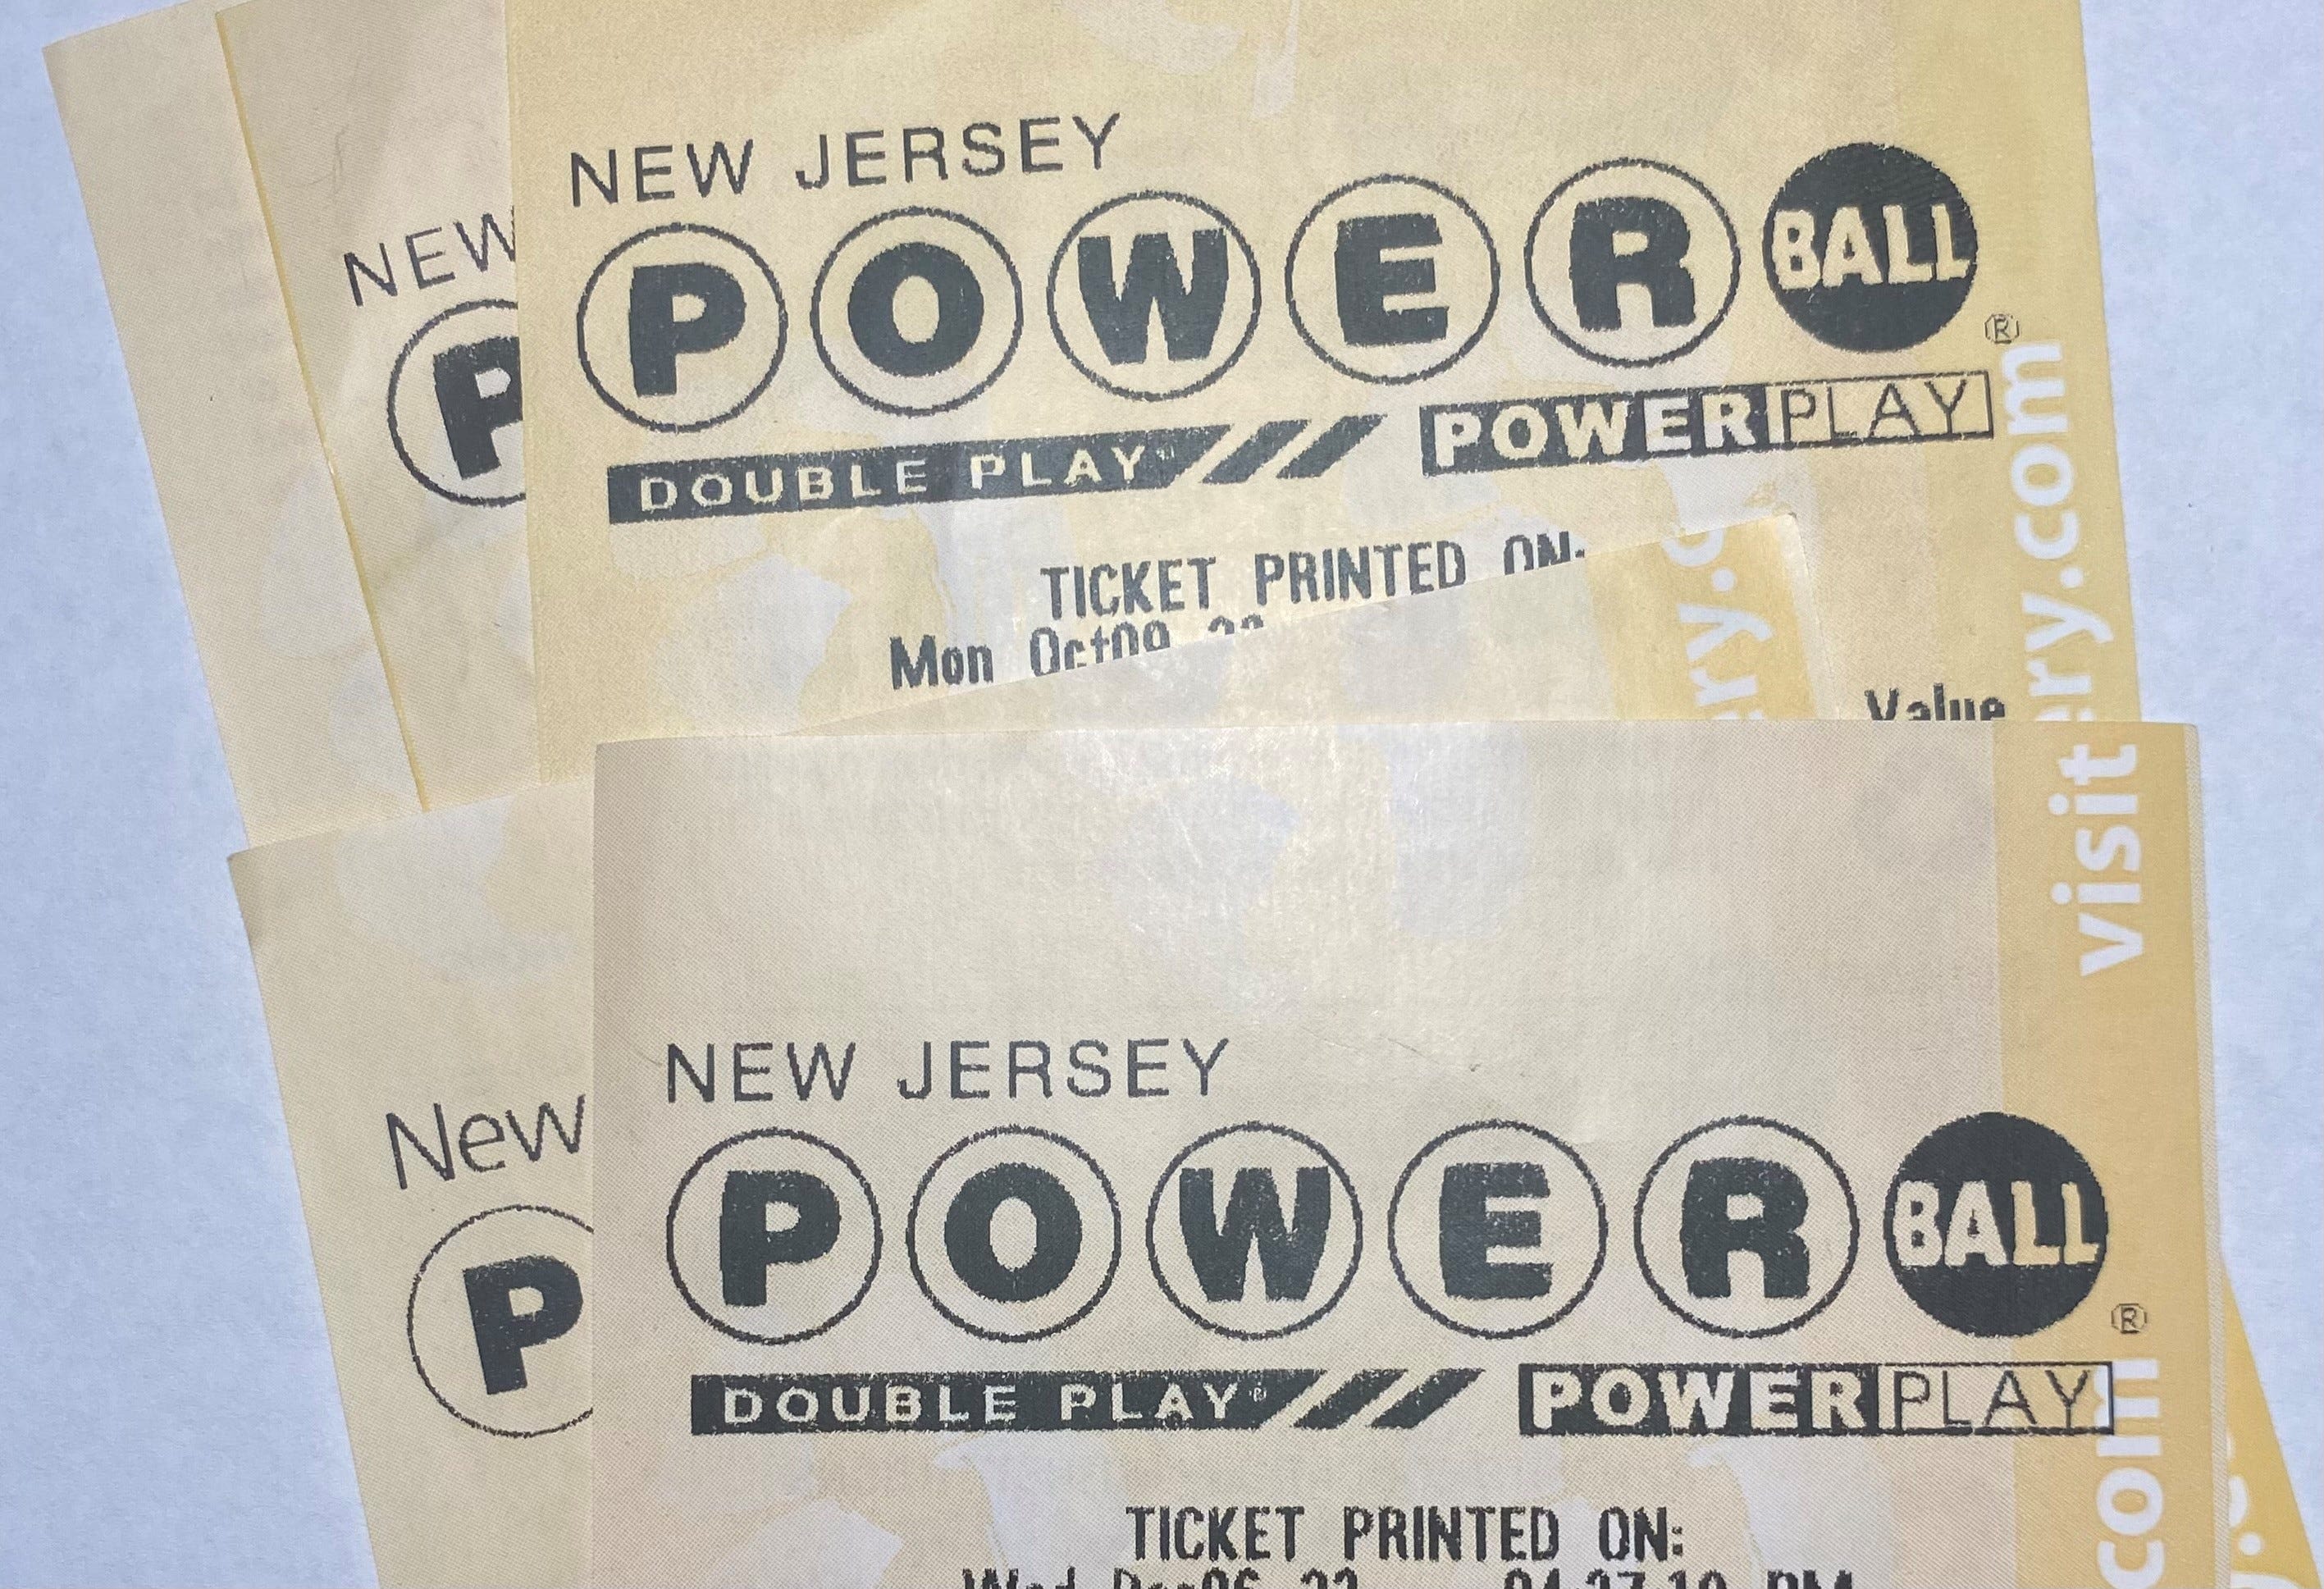 Powerball winning numbers for Saturday, July 13. Check tickets for $54 million drawing